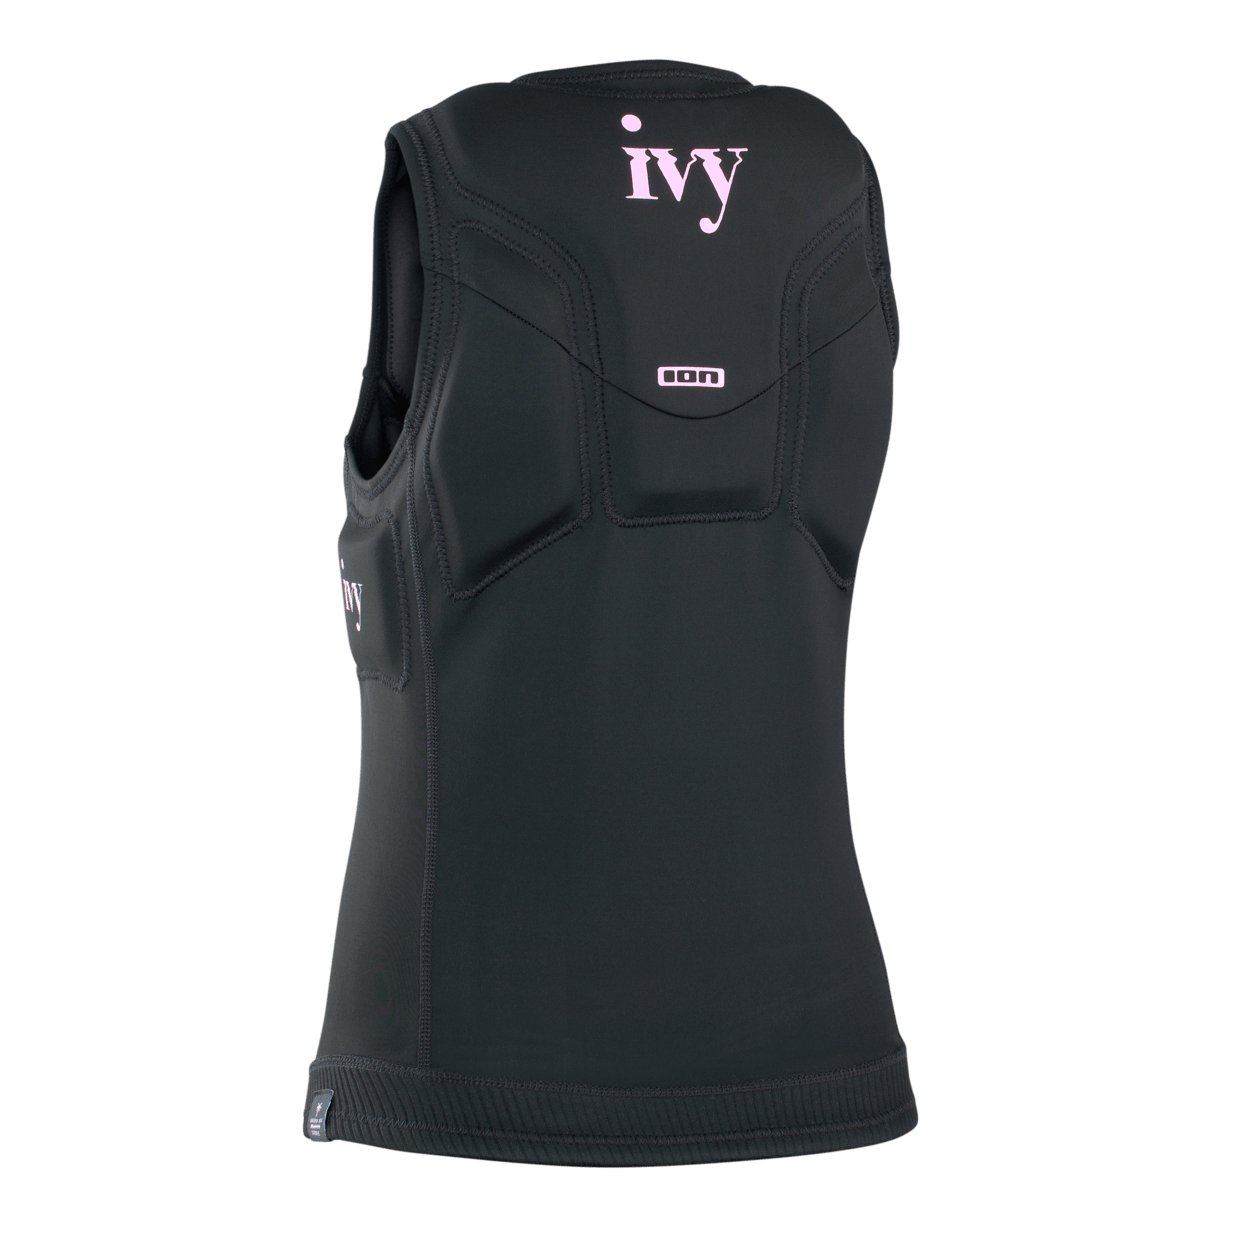 ION Ivy Vest Front Zip 2022 - Worthing Watersports - 9010583015644 - Protection - ION Water